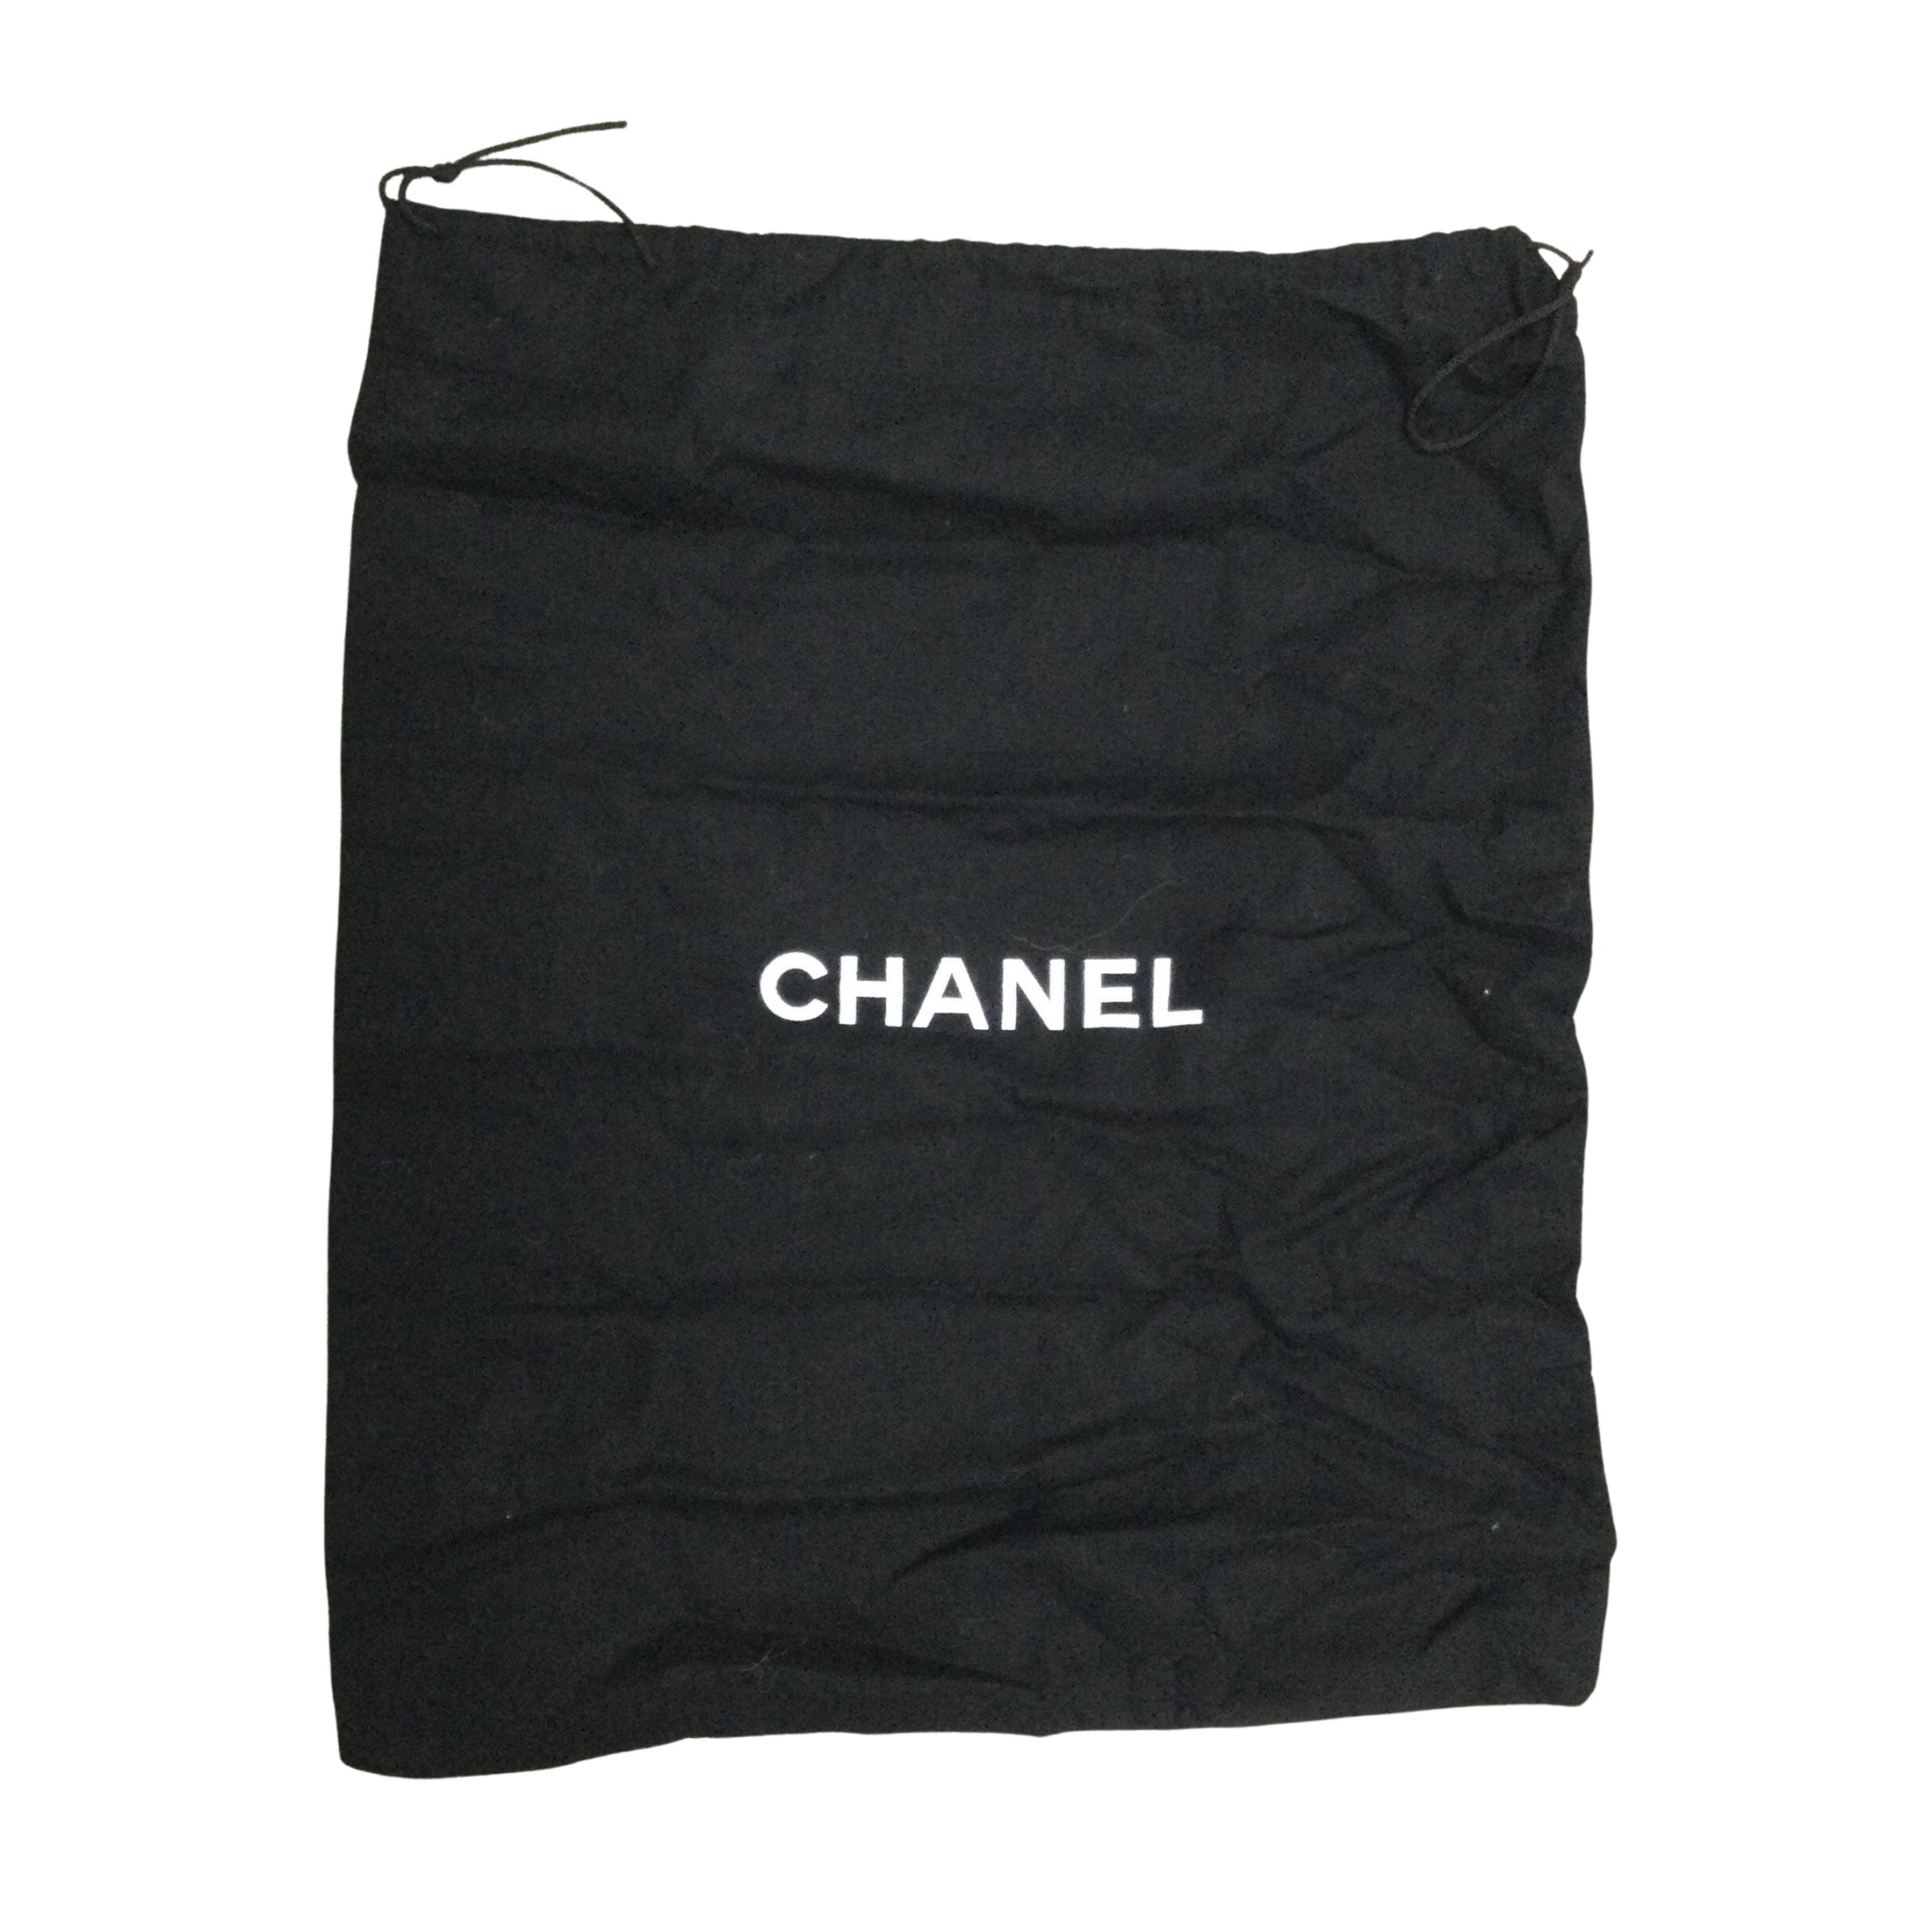 Chanel Pony and Leather Frame Black Calf Hair Clutch